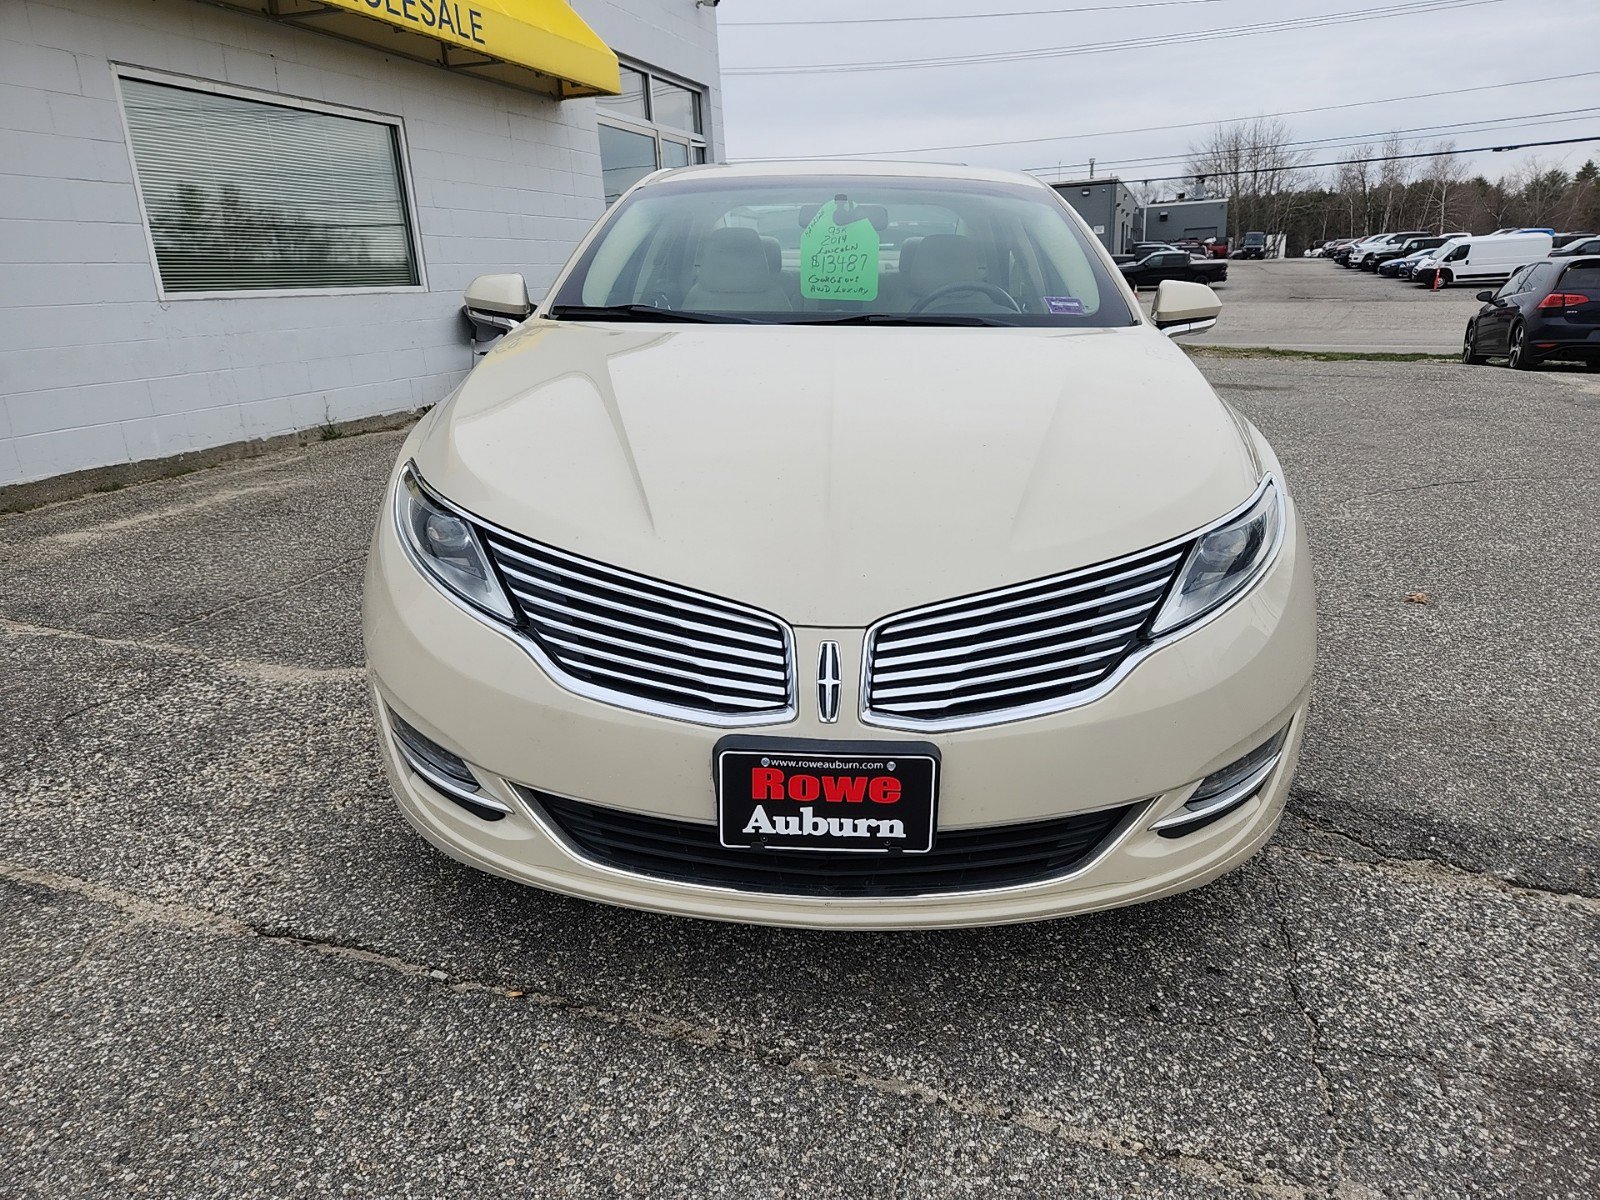 Used 2014 Lincoln MKZ  with VIN 3LN6L2J91ER834064 for sale in Auburn, ME